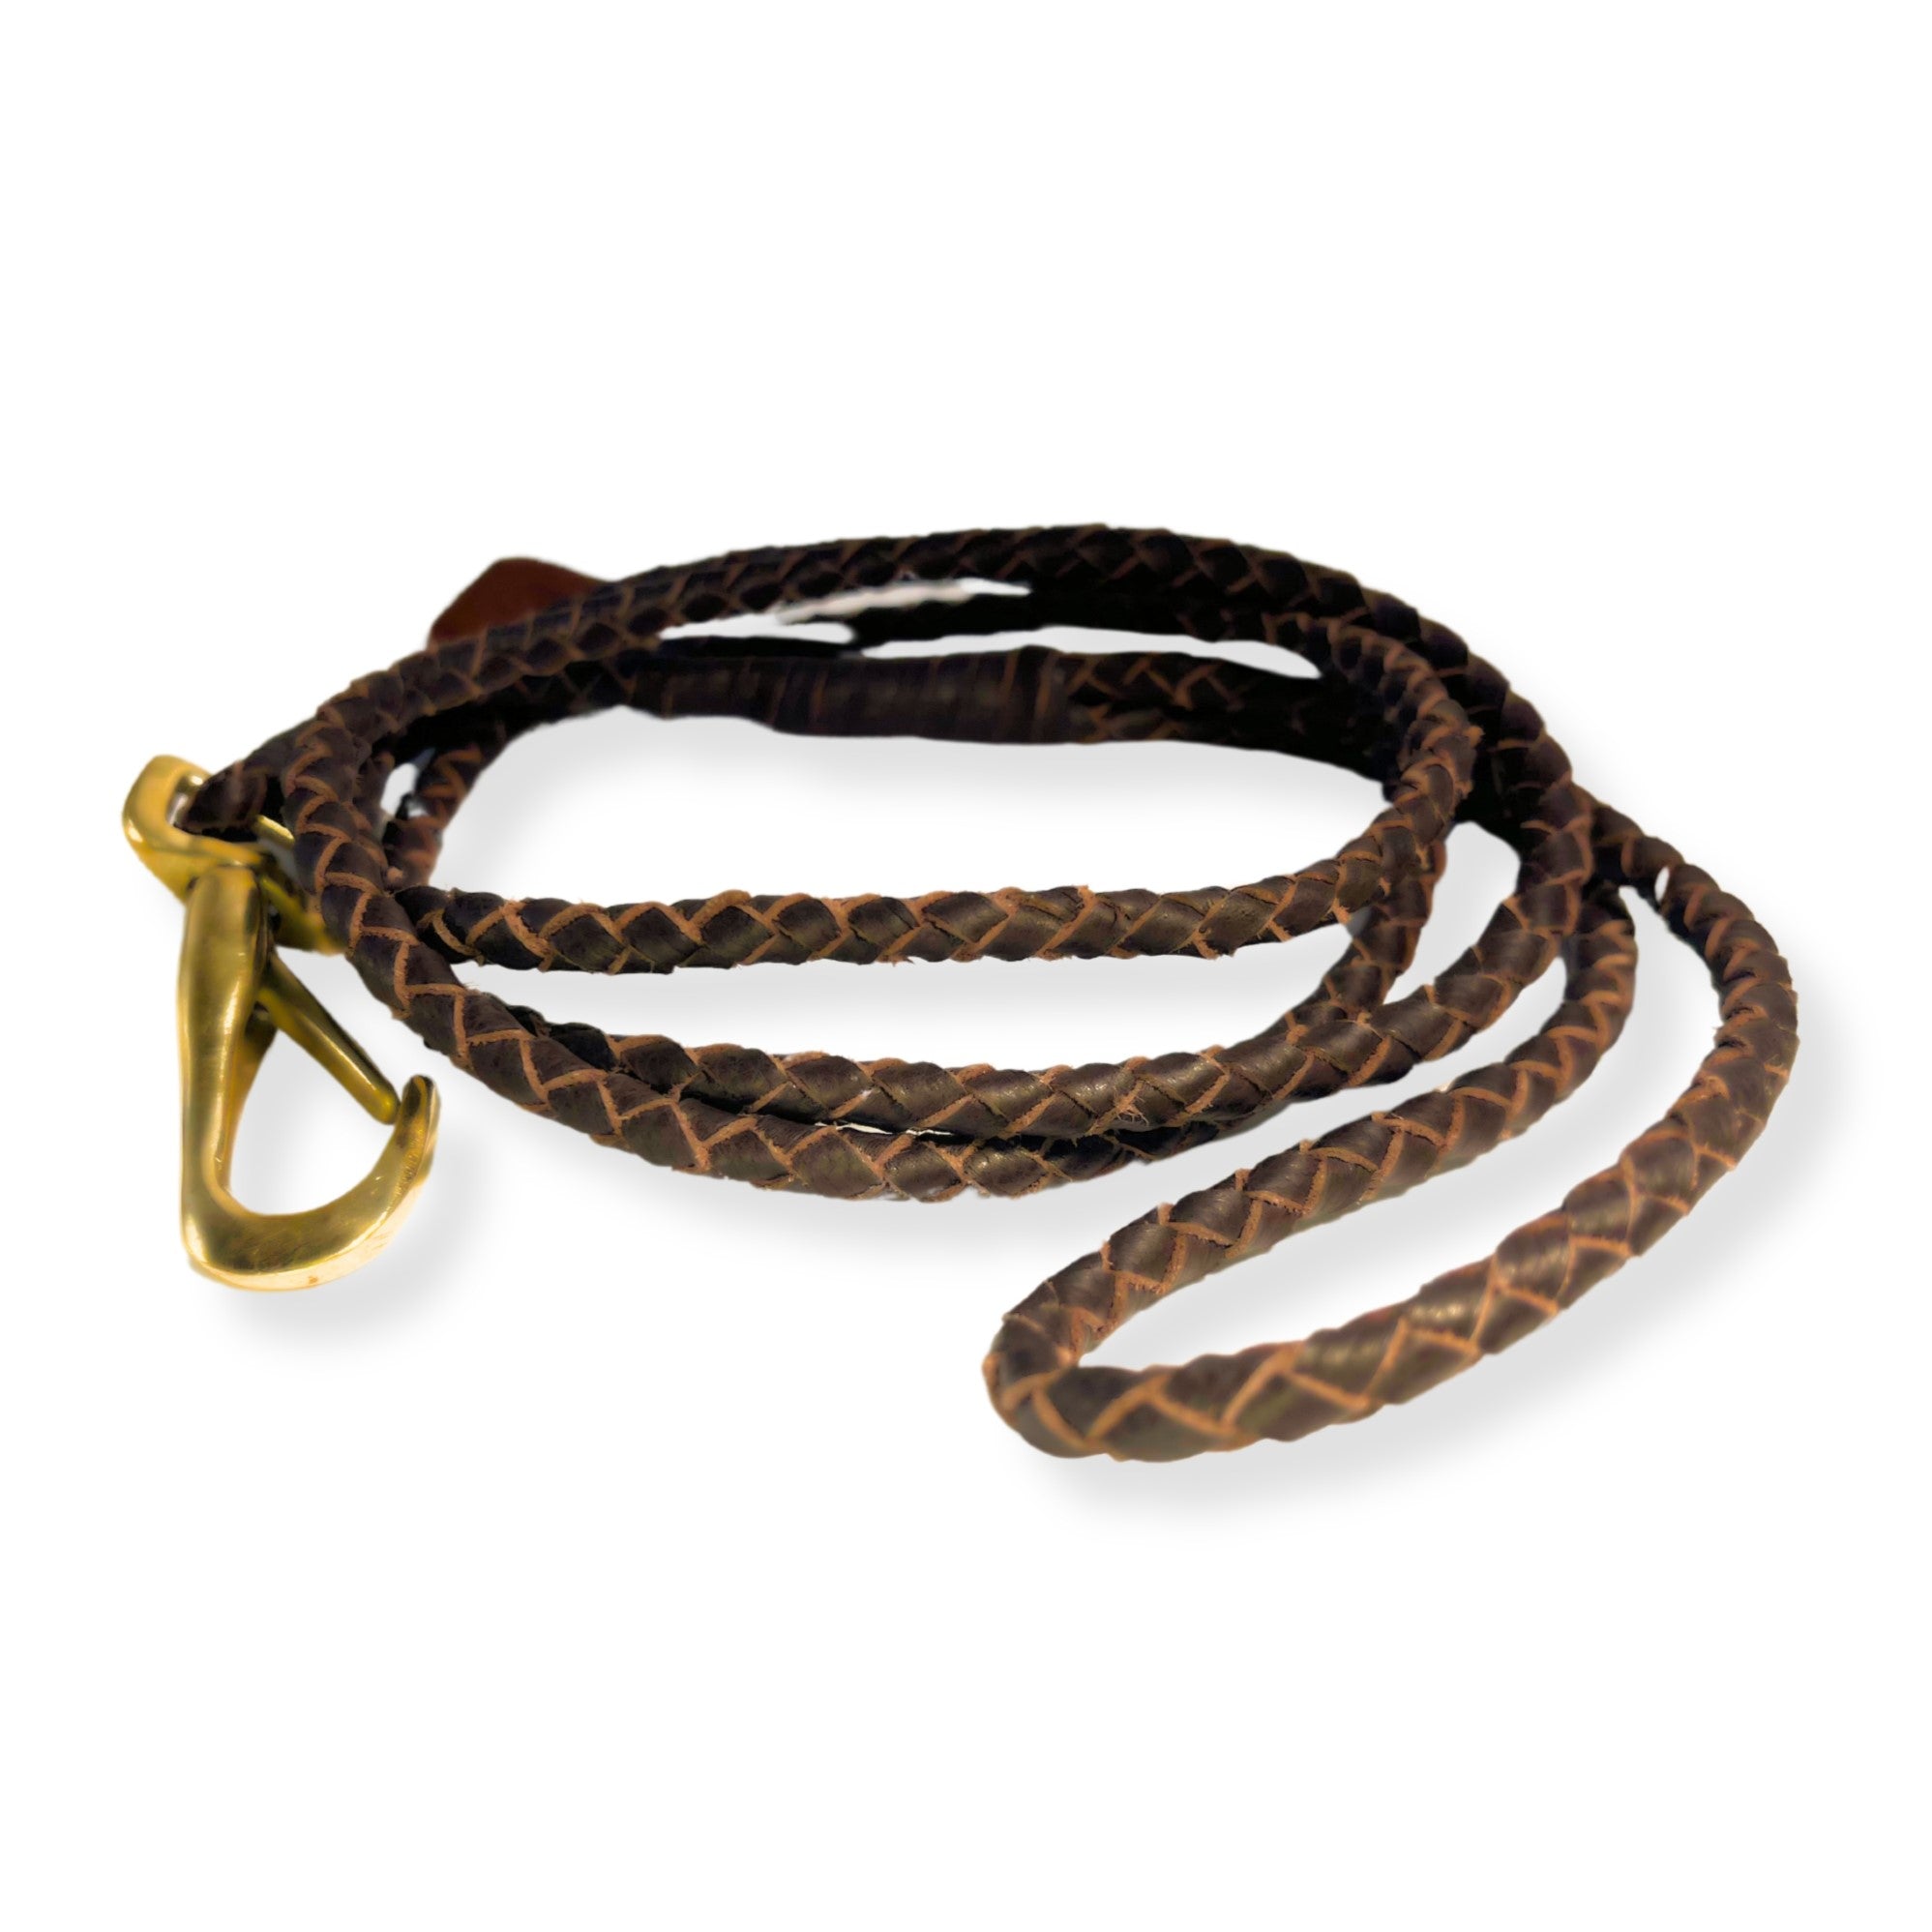 A Lulu Lead - chicory by Georgie Paws, with a brass carabiner clasp, isolated on a white background, showcasing its elegant design suitable for dog walking.